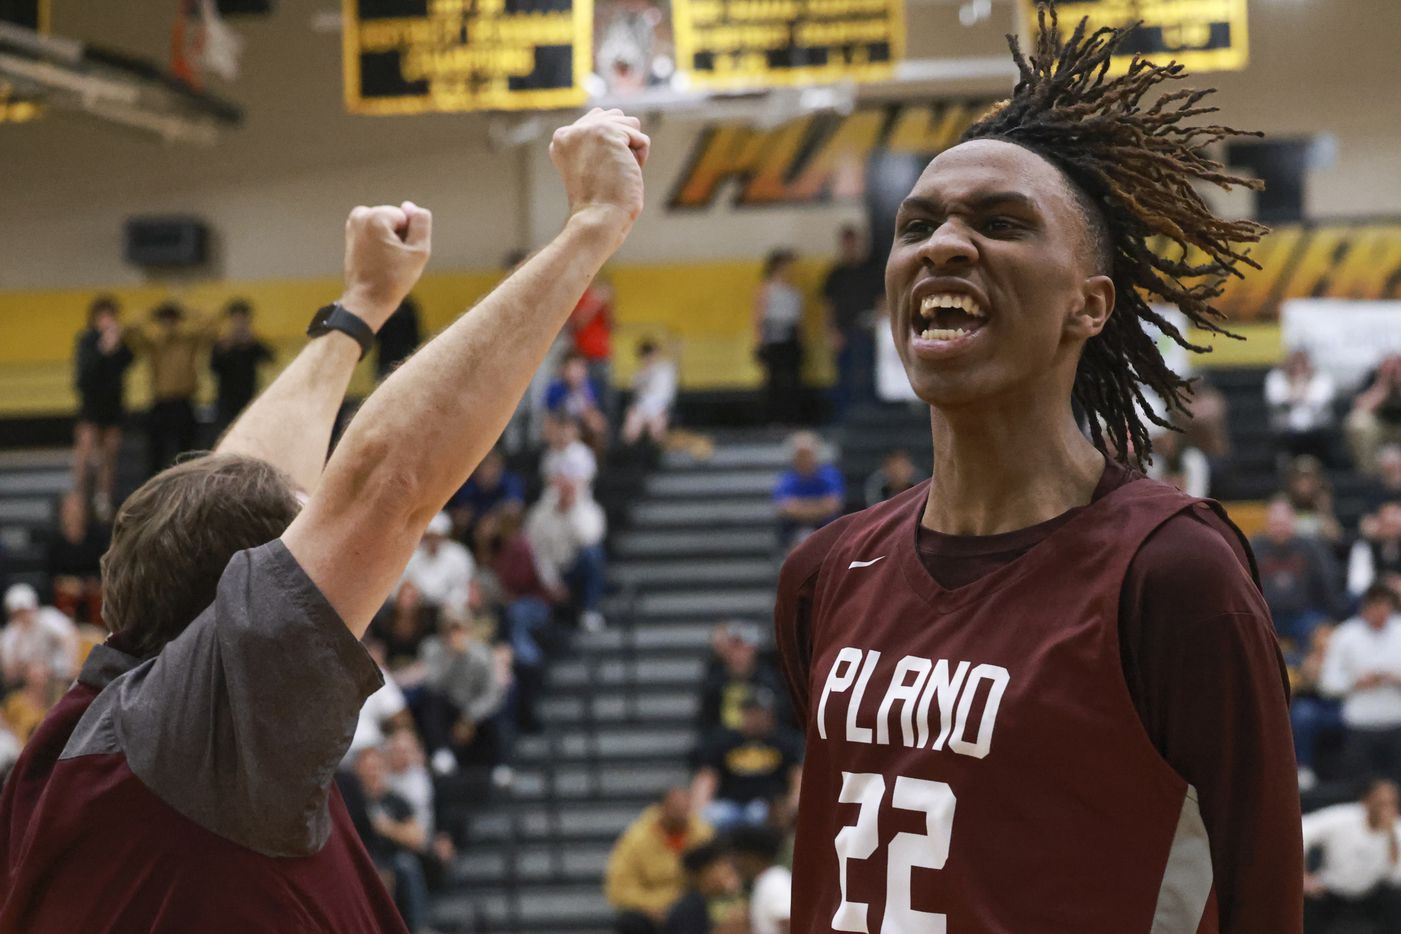 Plano Senior High School’s Nikk Williams (22) turns to the crowd cheering after Justin...